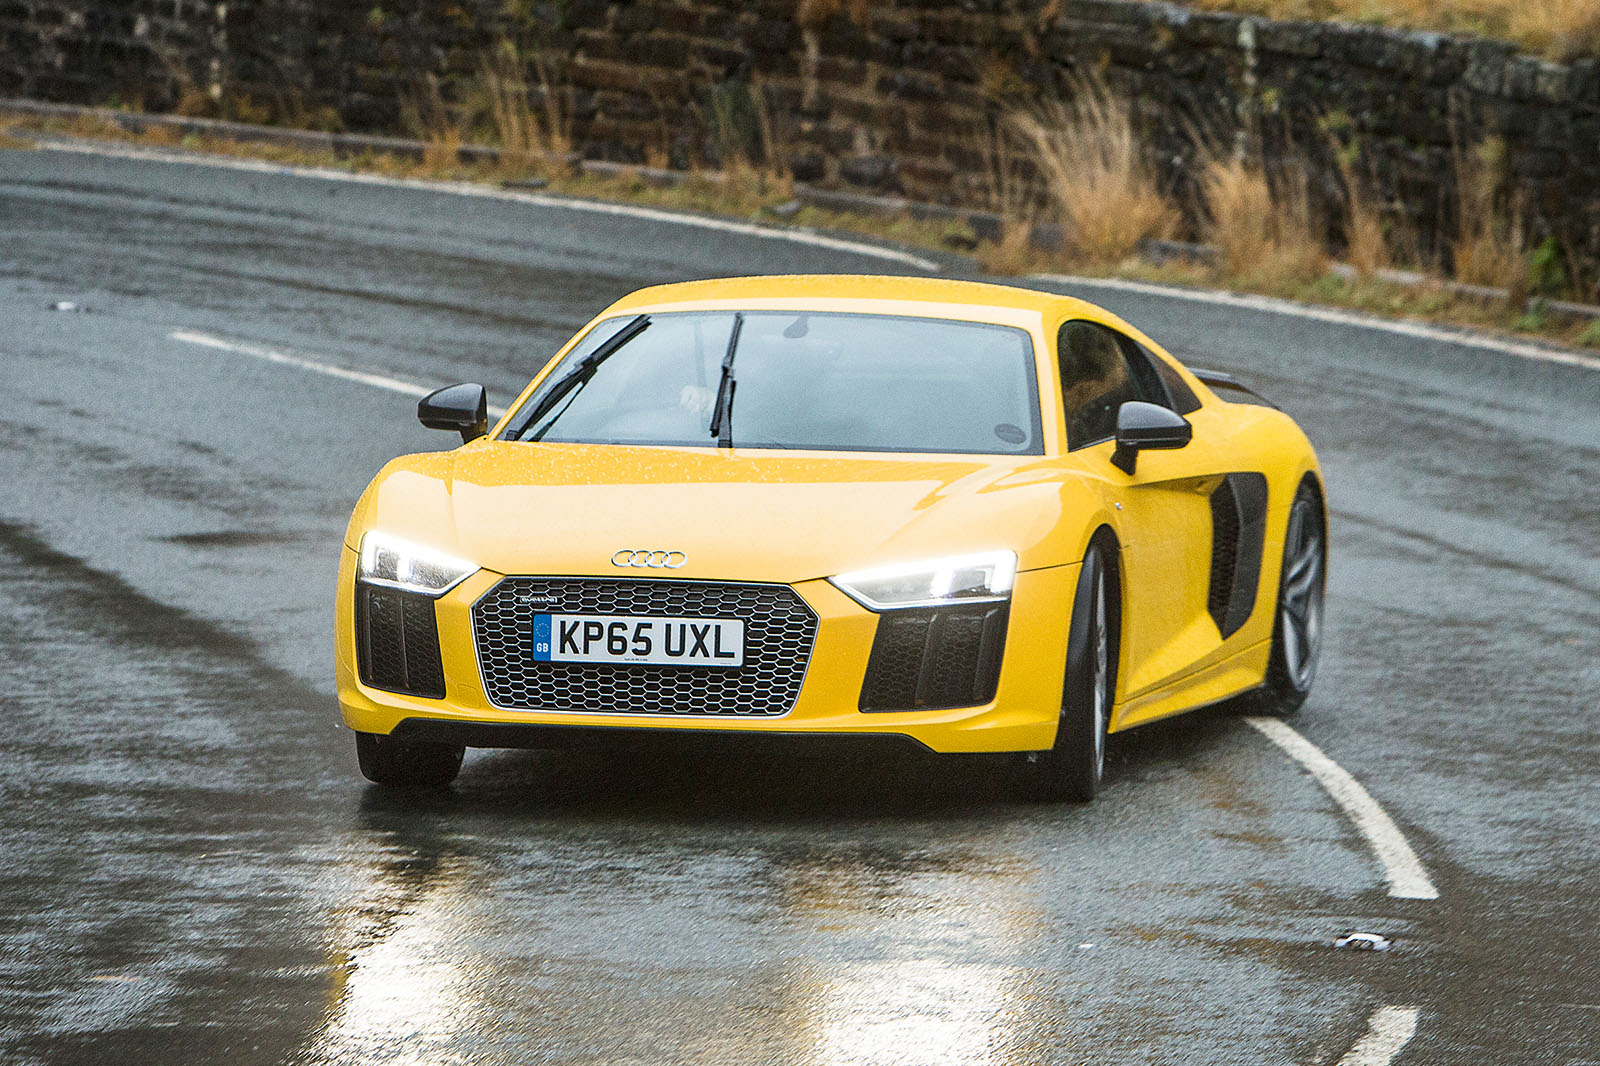 The Audi R8's ride is firm, yet reactive...